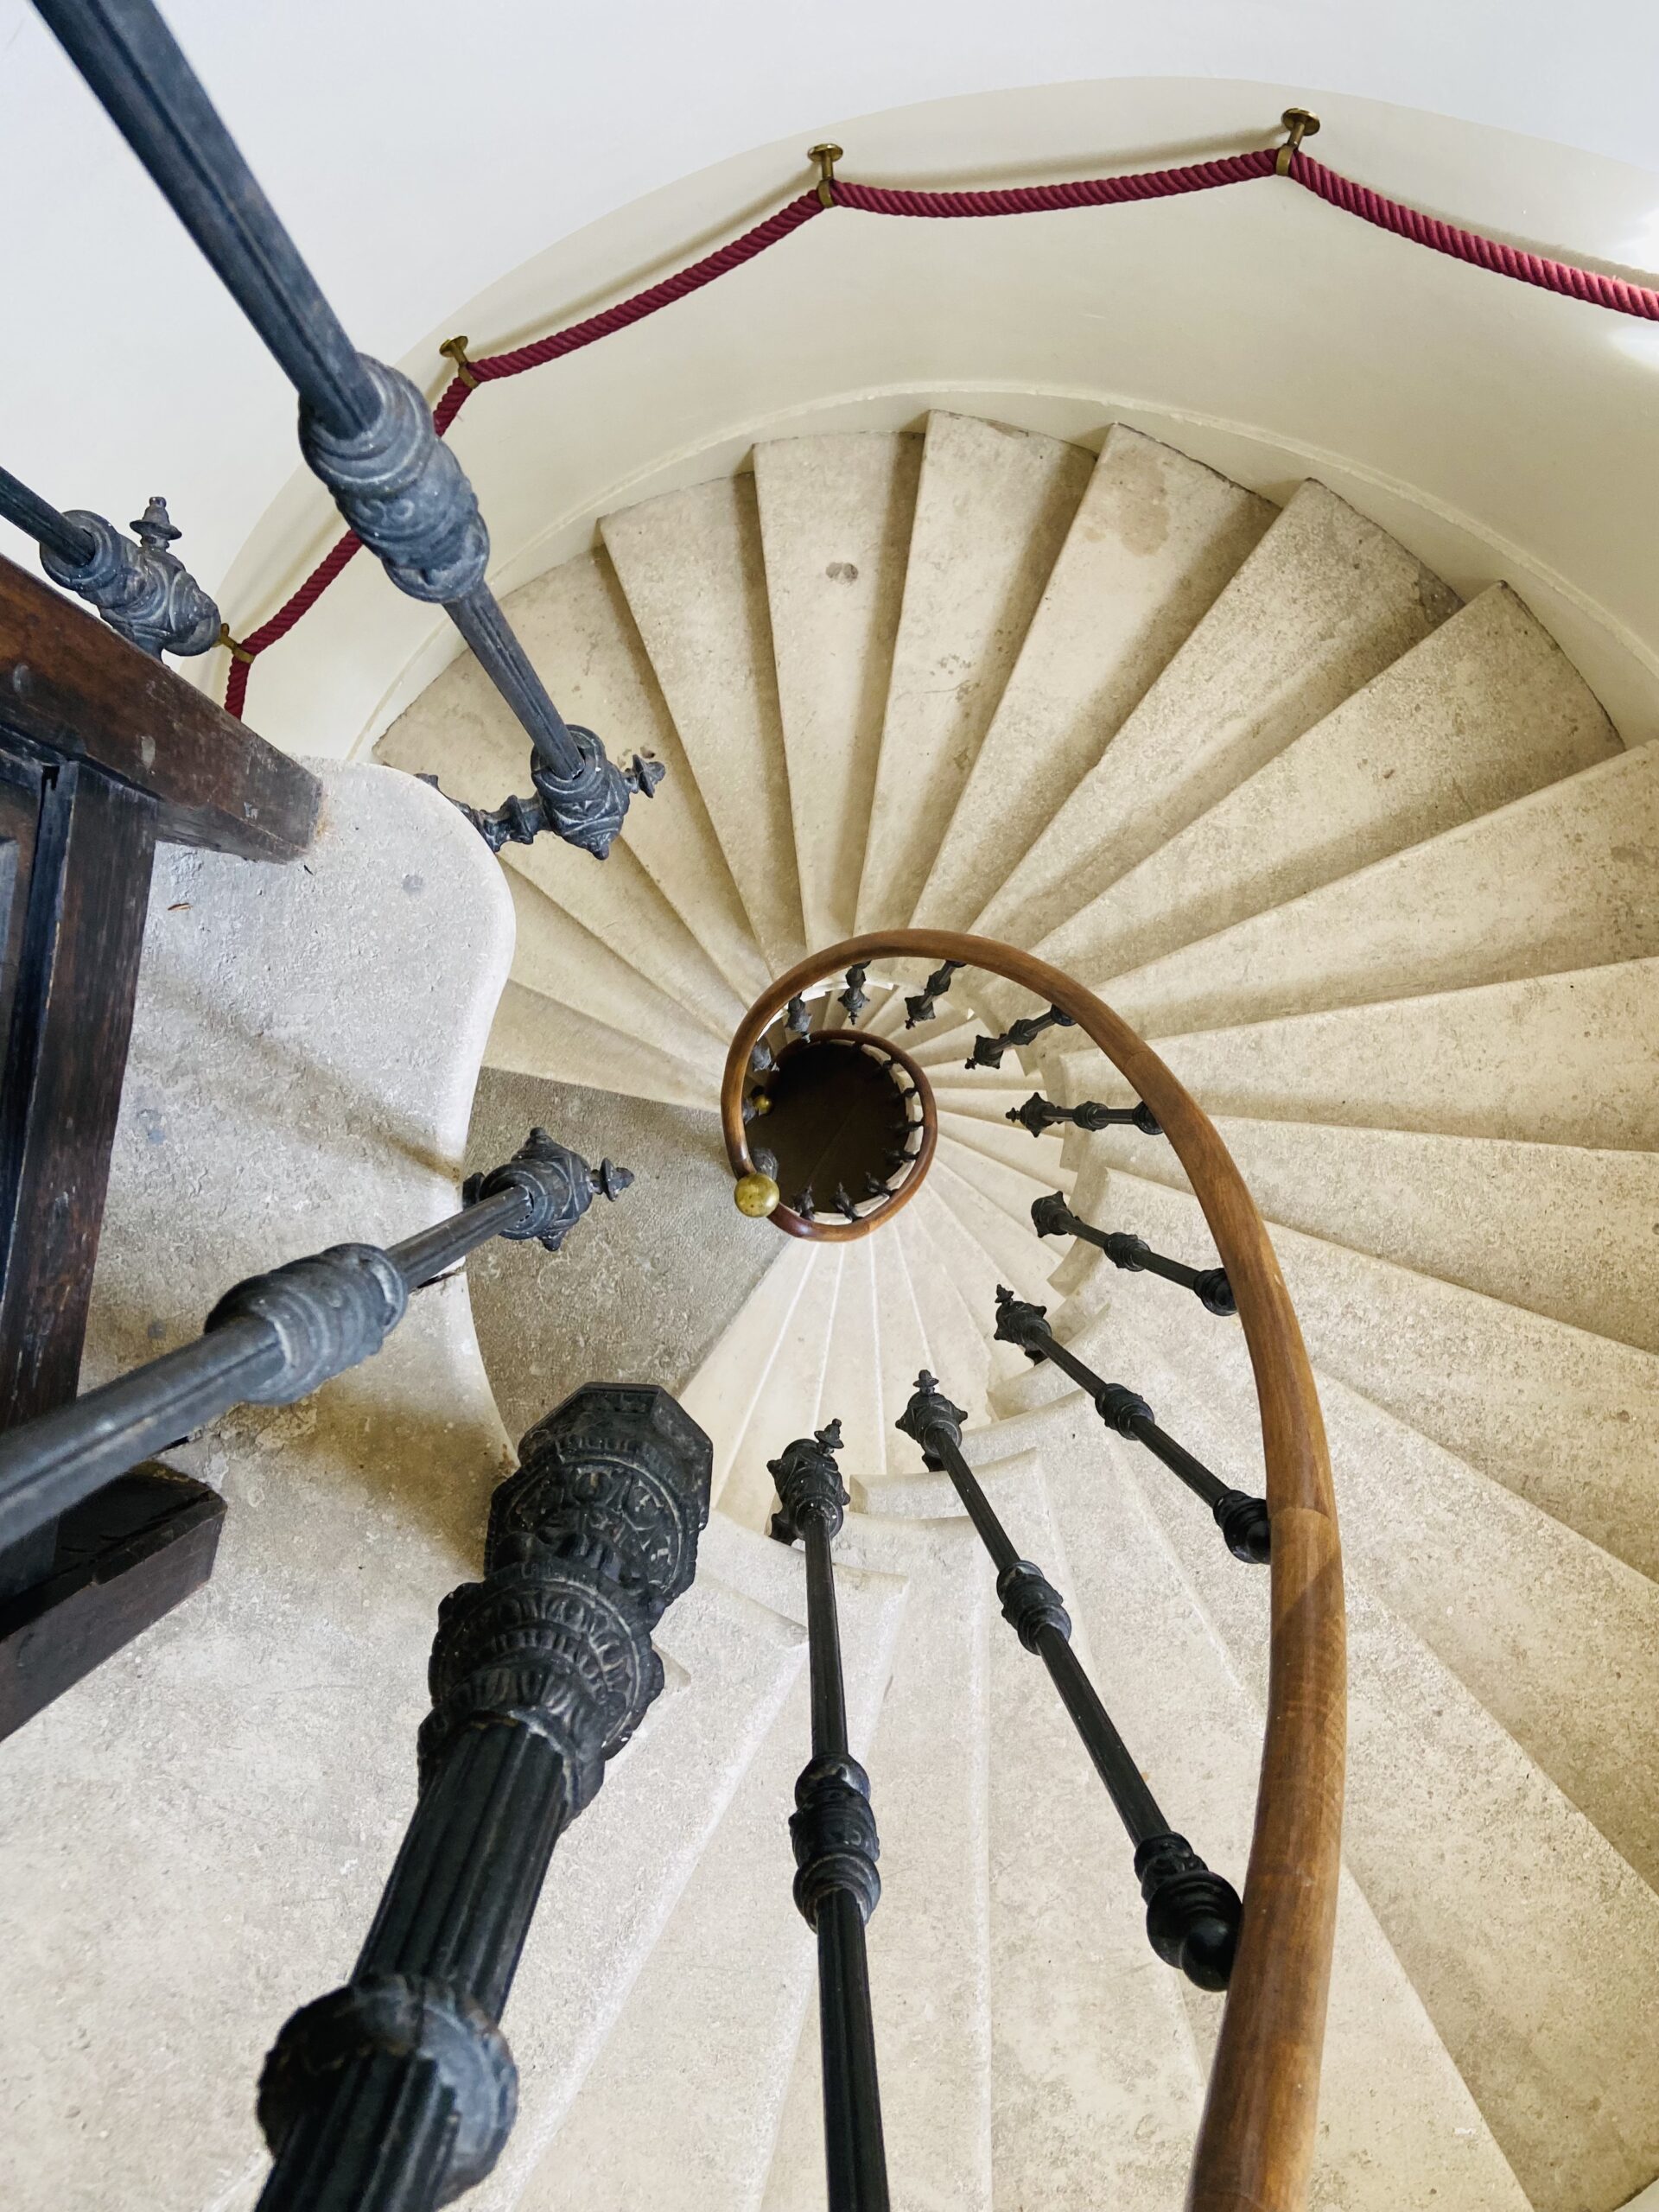 the spiral of a staircase bed & breakfast weddings